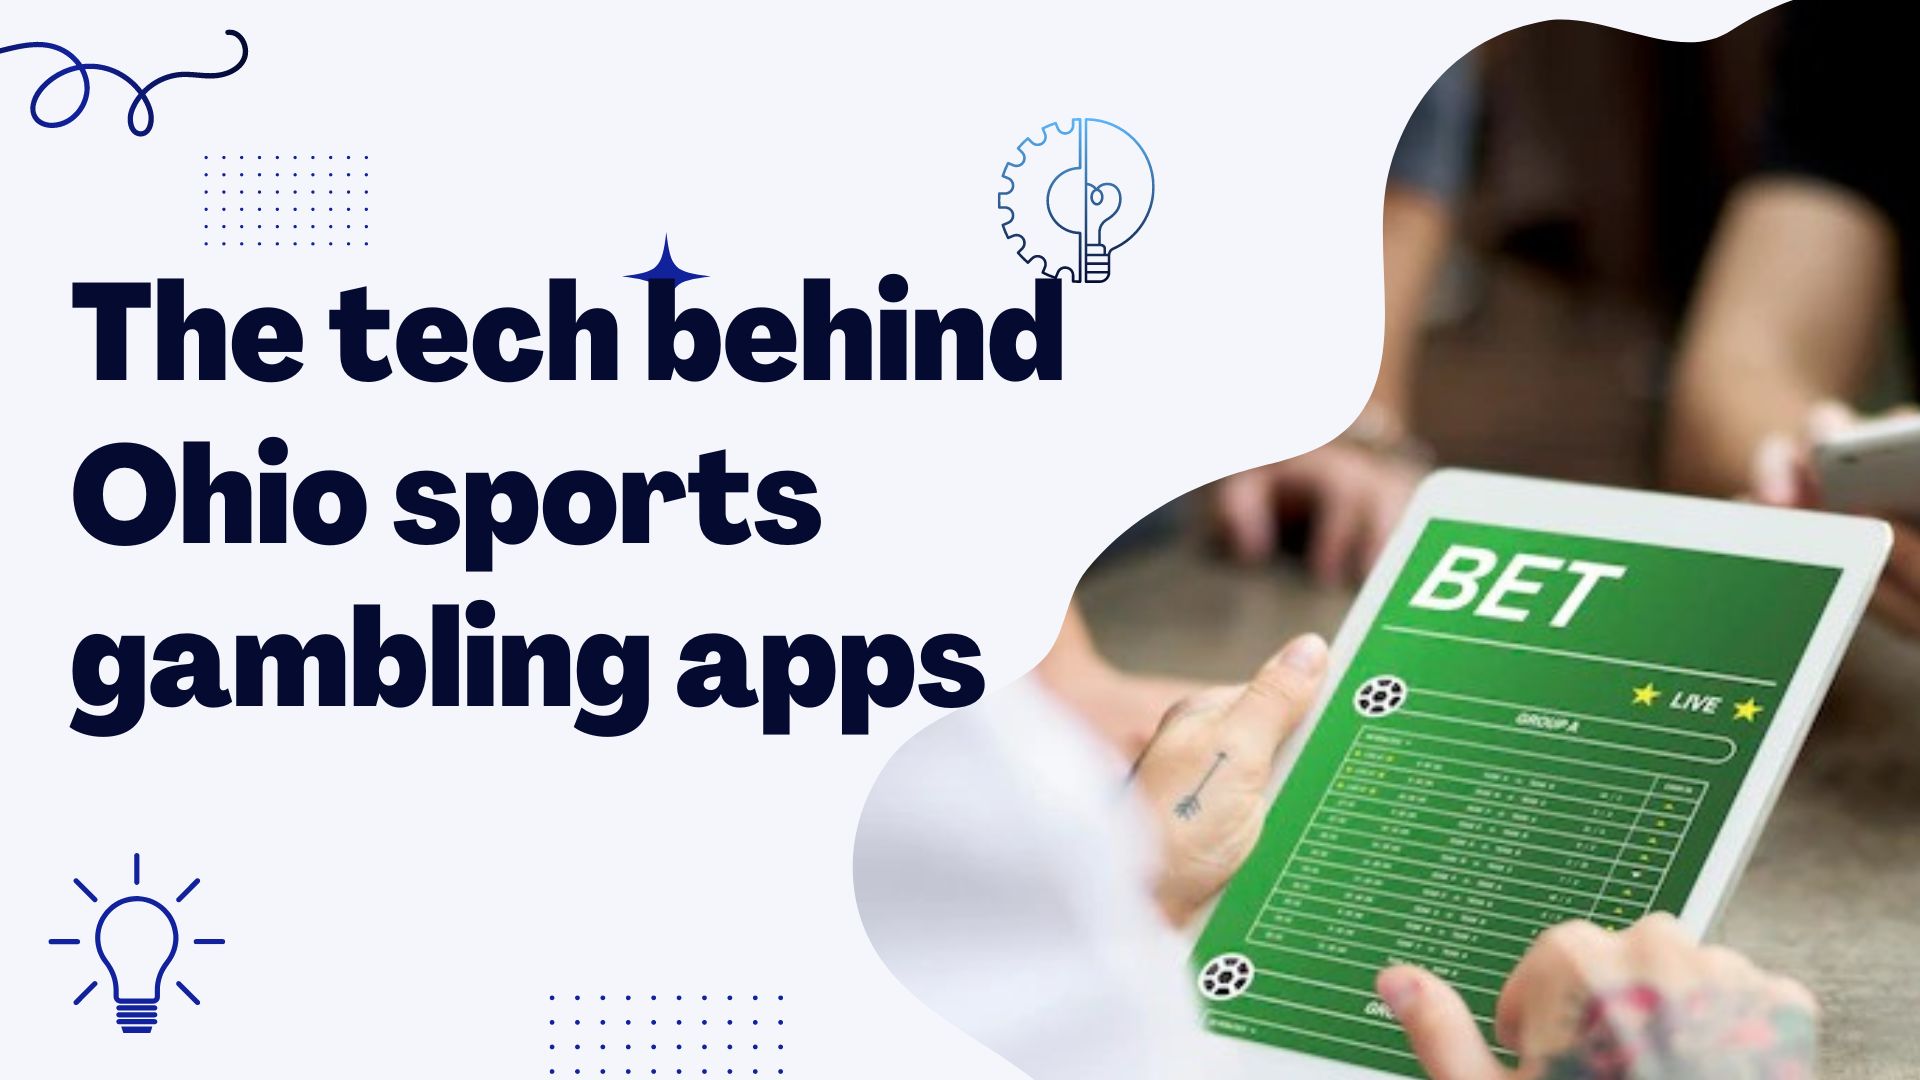 The tech behind Ohio sports gambling apps